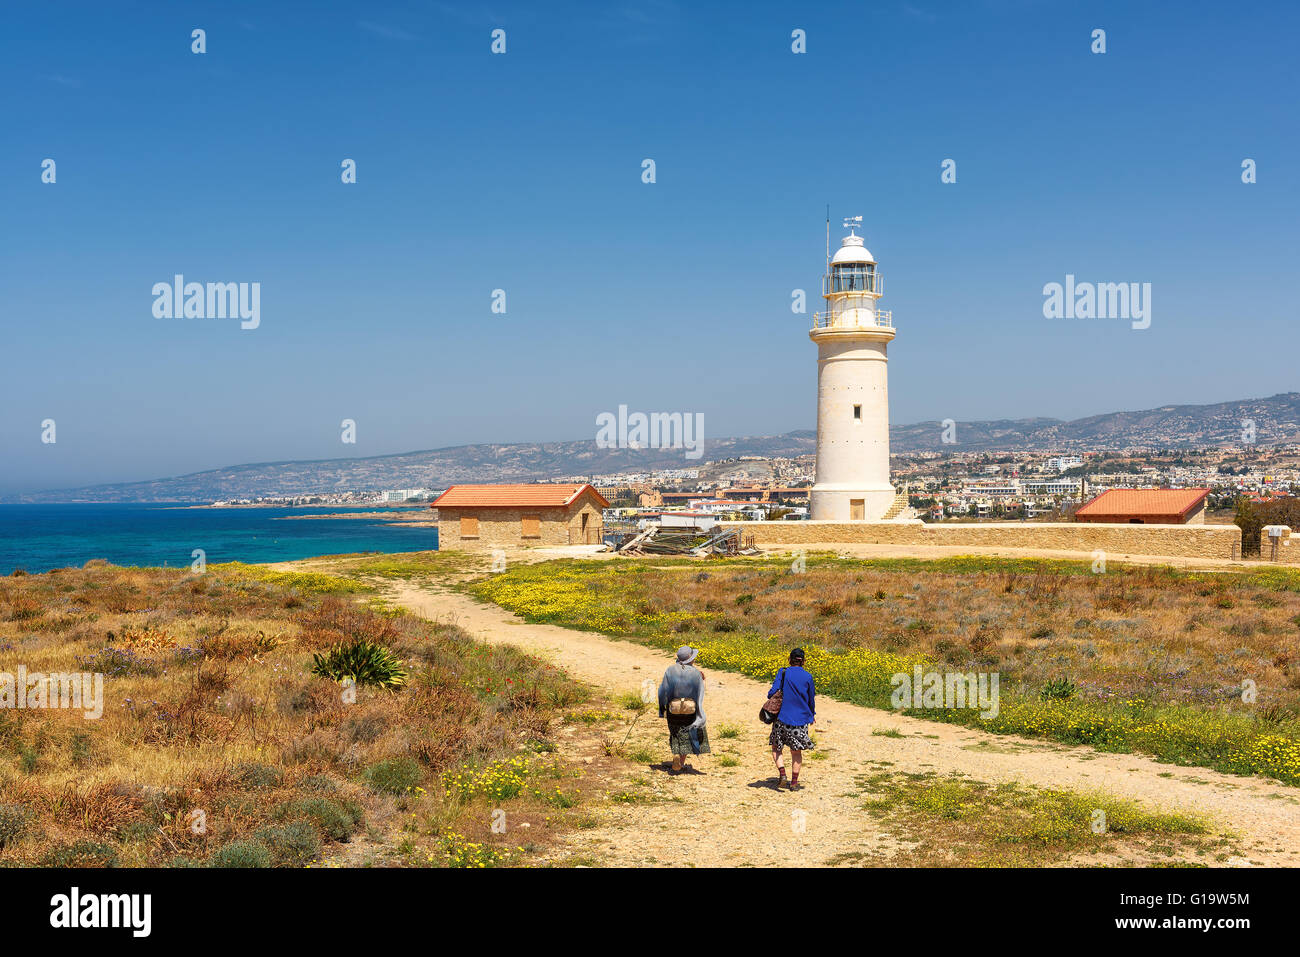 Old lighthouse in city of Paphos, Cyprus Stock Photo